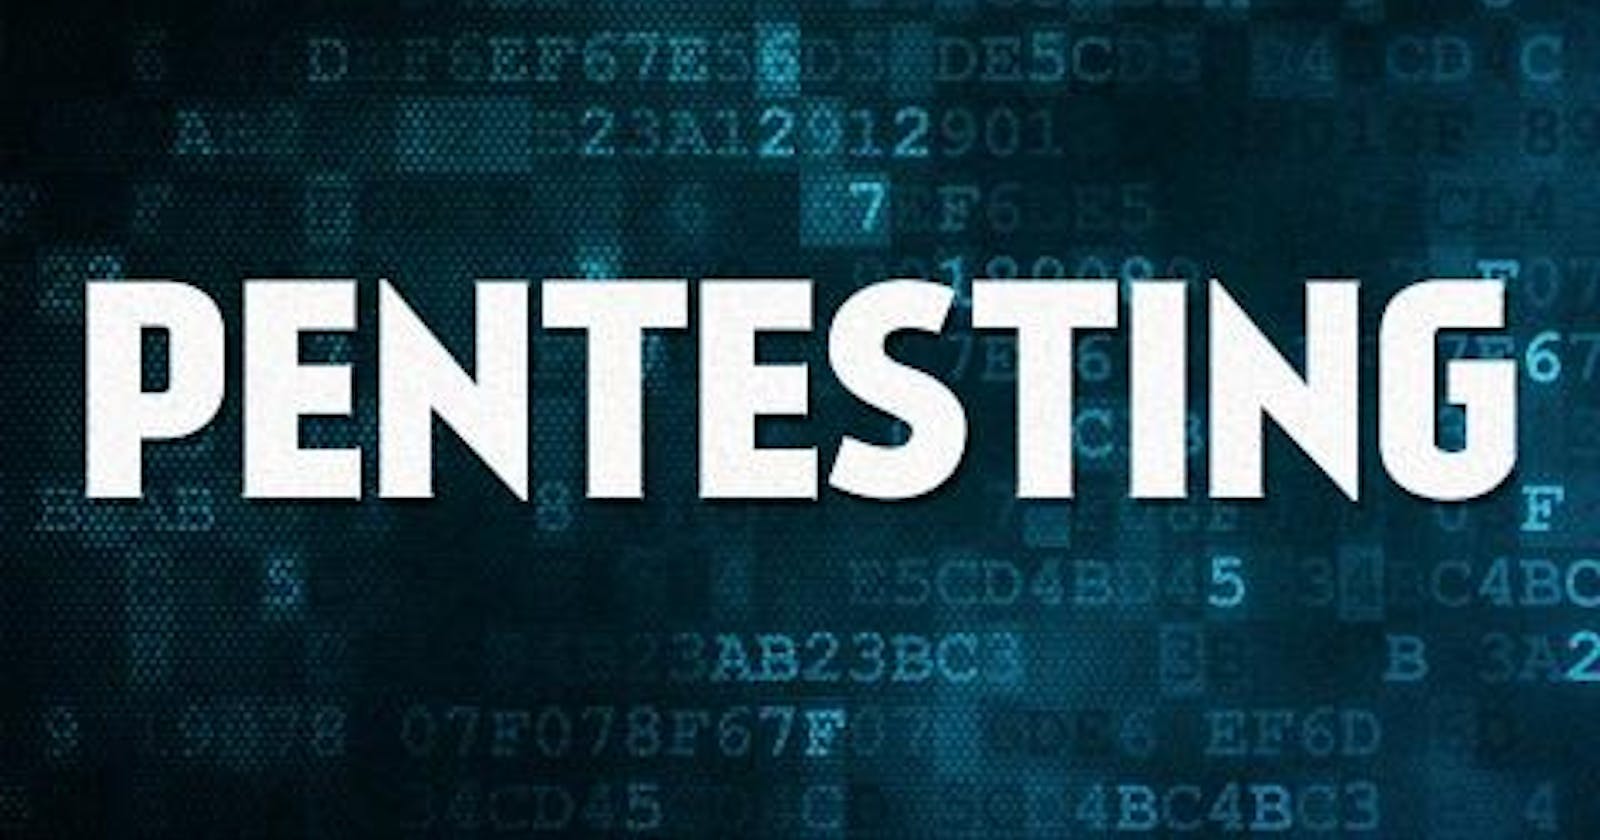 What Is Pentesting?